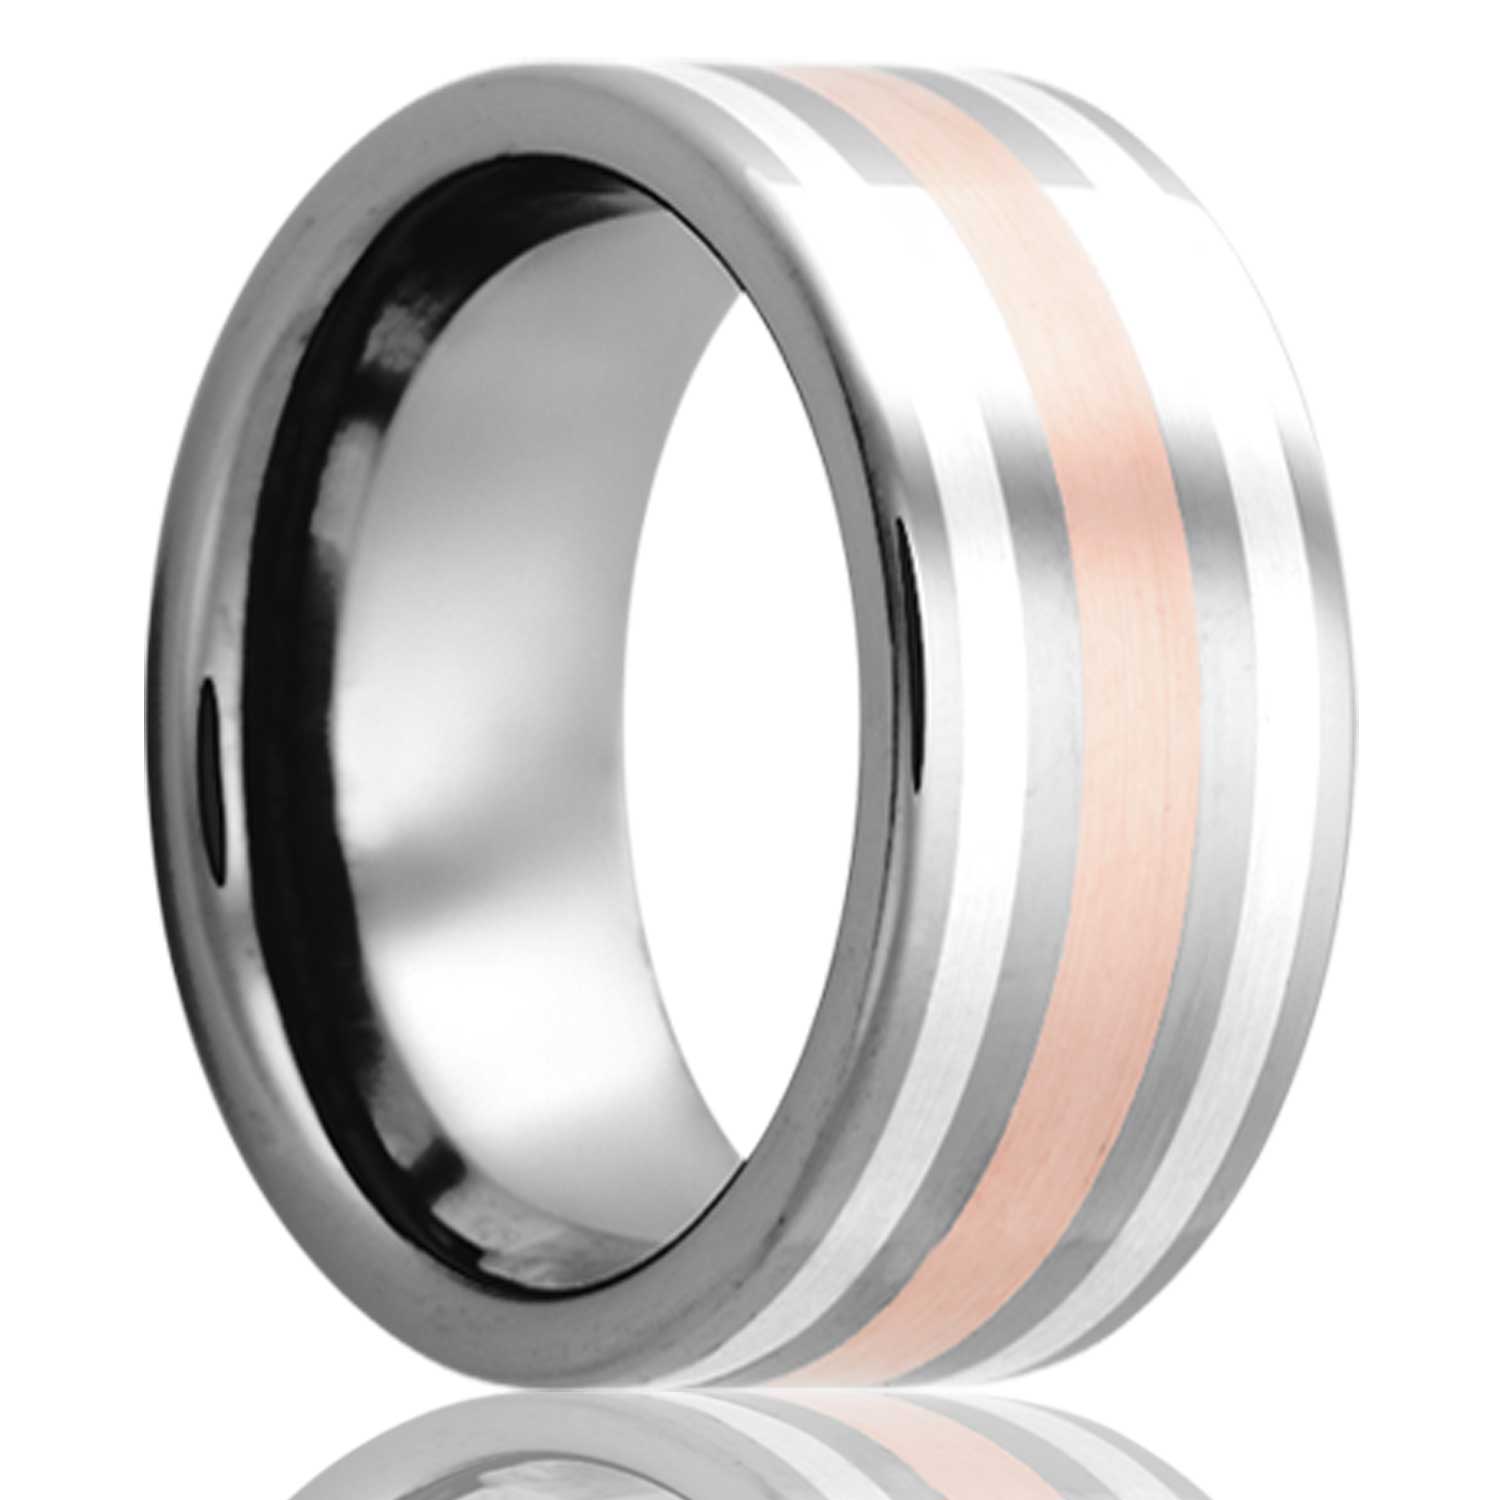 A argentium silver & 14k rose gold inlay cobalt men's wedding band displayed on a neutral white background.